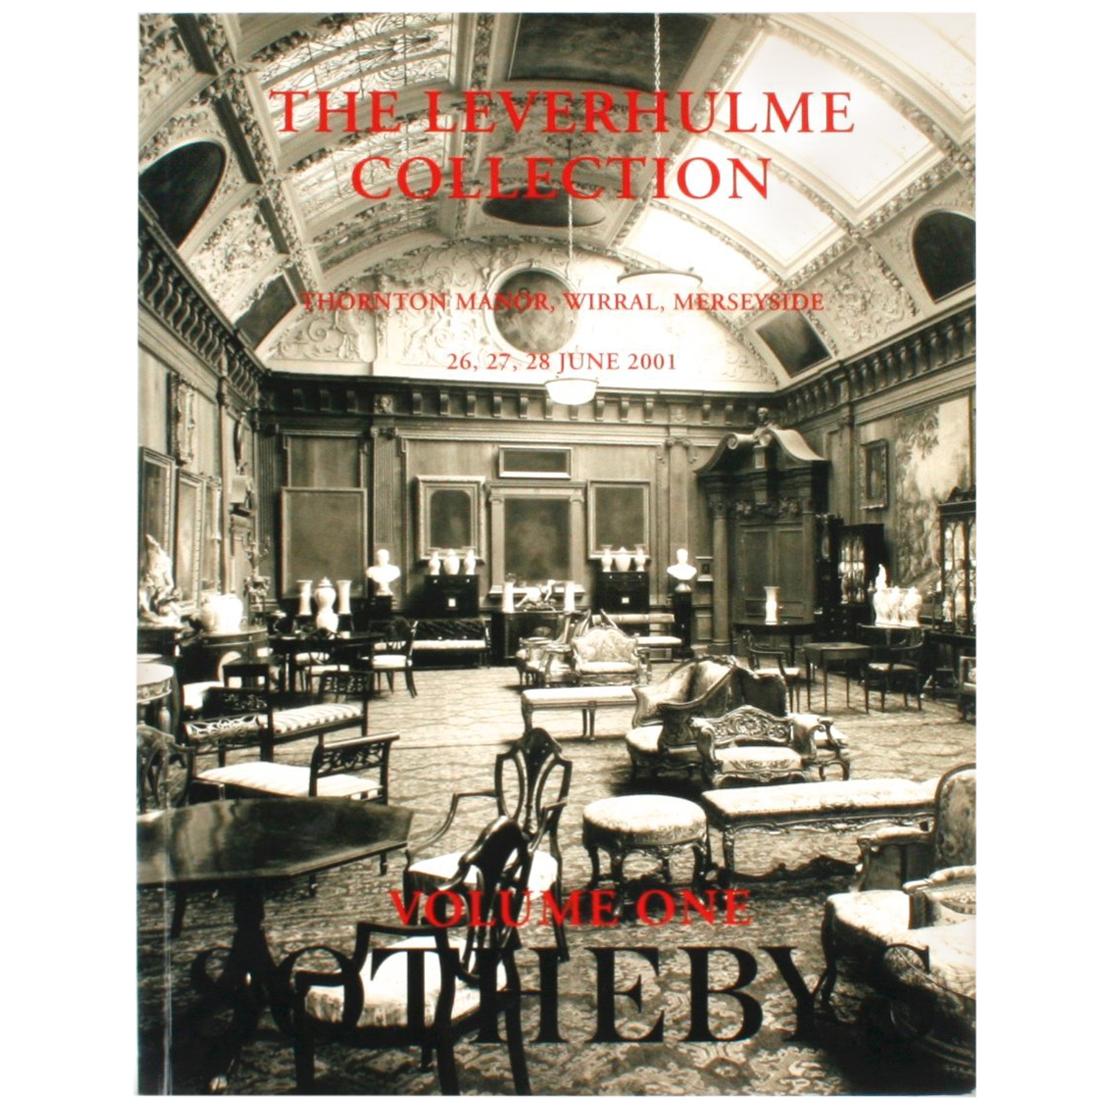 "The Leverhulme Collection: Thornton Manor, Wirral Merseyside - Volume One"